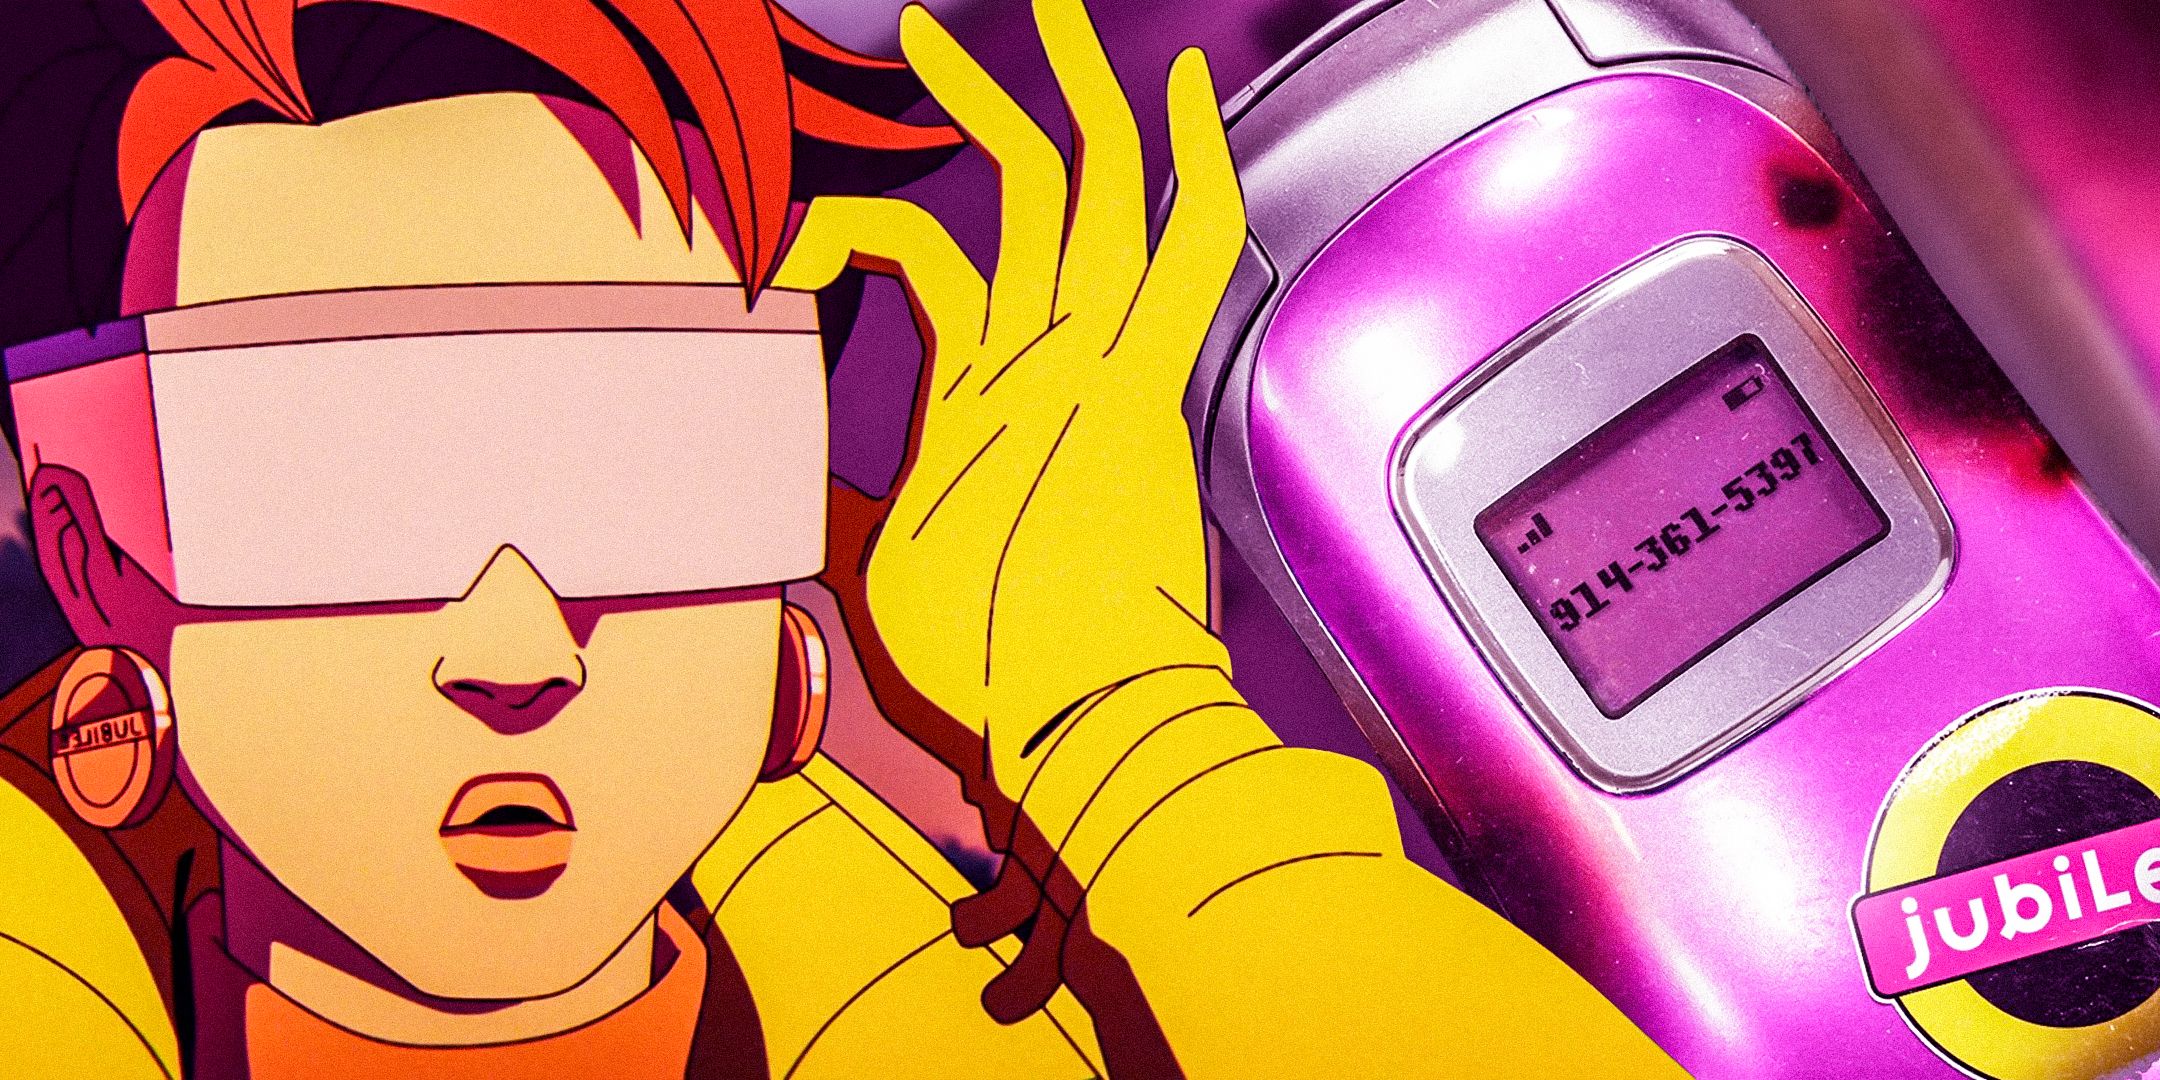 Jubilee with a hand on her shades in X-Men '97 (2024) on the left, Jubilee's pink cellphone with the number 914-361-5387 from a Marvel Studios tweet on the right